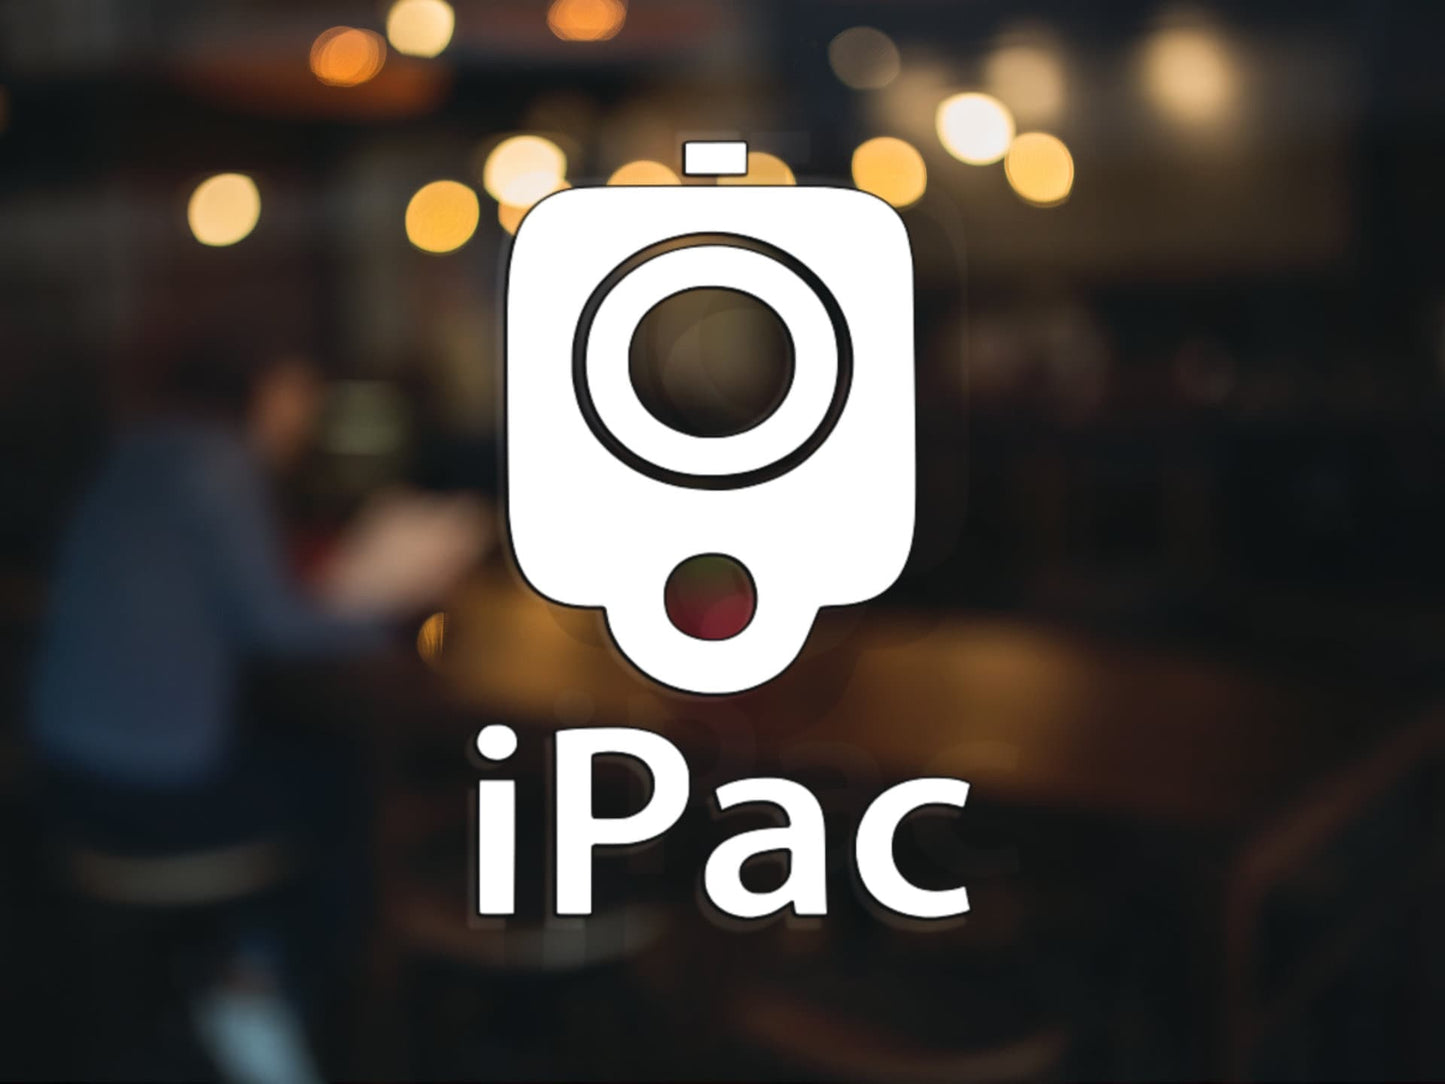 iPac Decal - Many Colors & Sizes